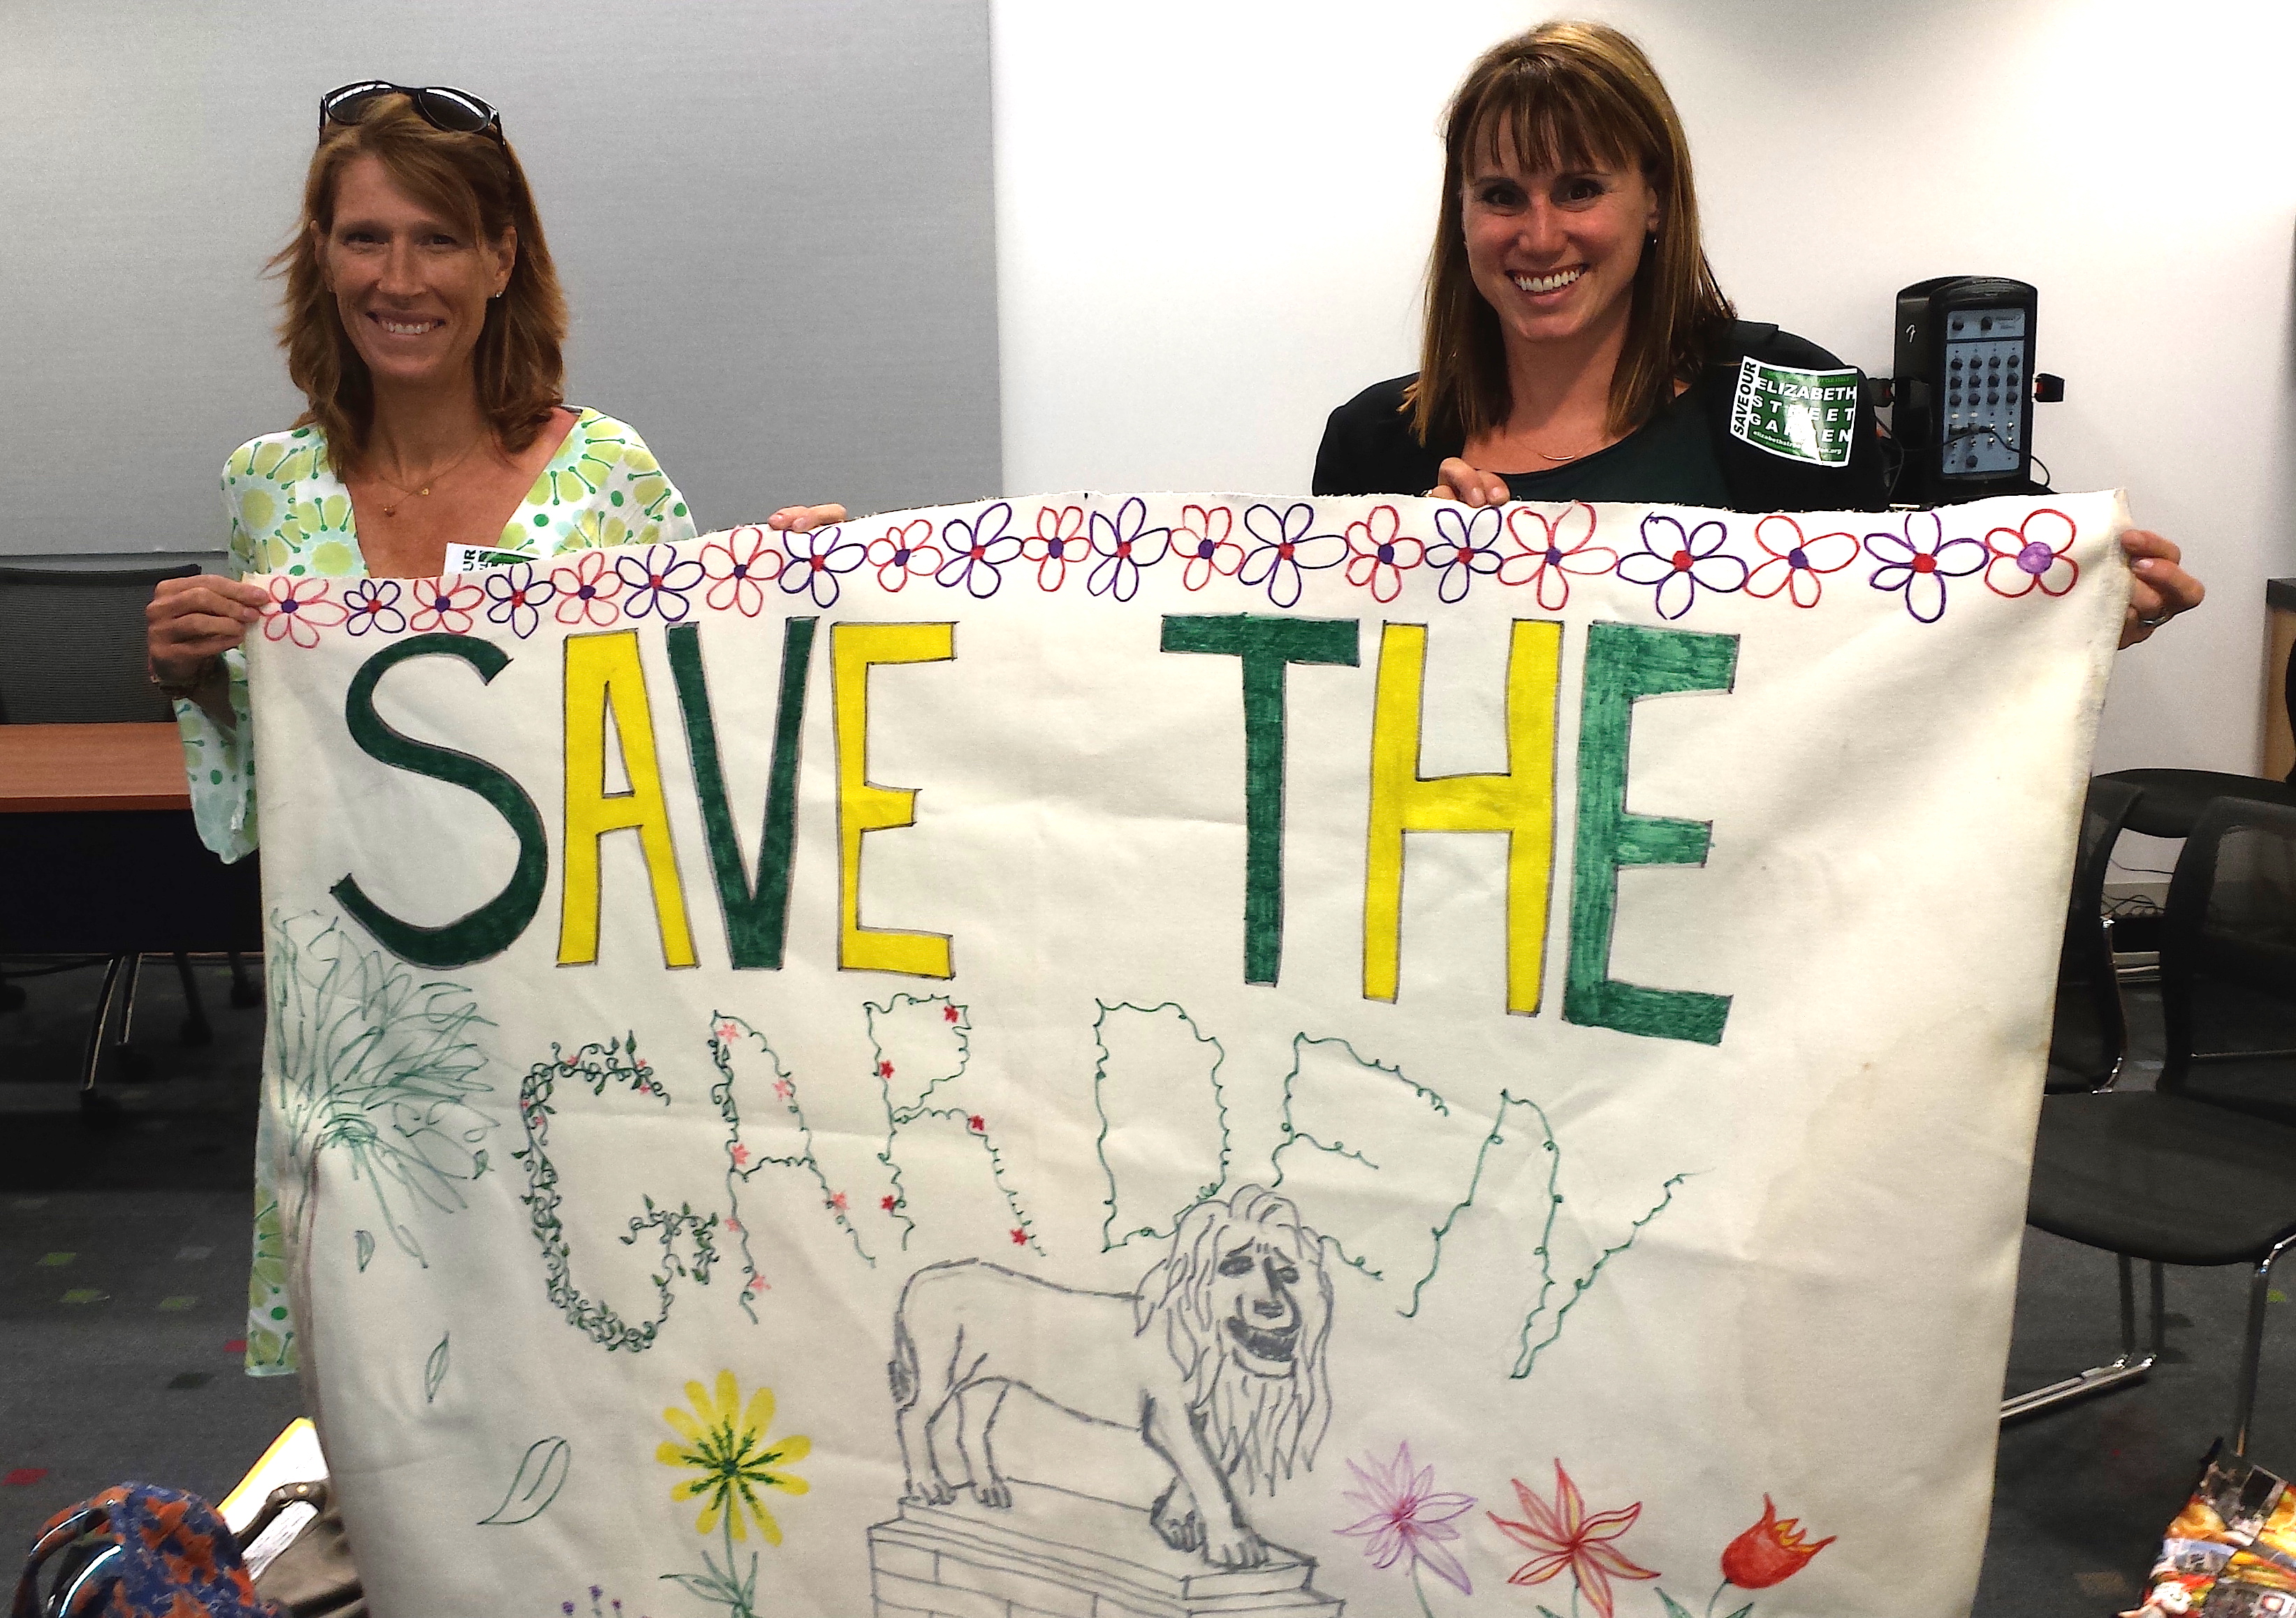 Garden leaders Emily Hellstrom, left, and Jeannine Kiely proudly displayed a banner for the Elizabeth St. Garden.